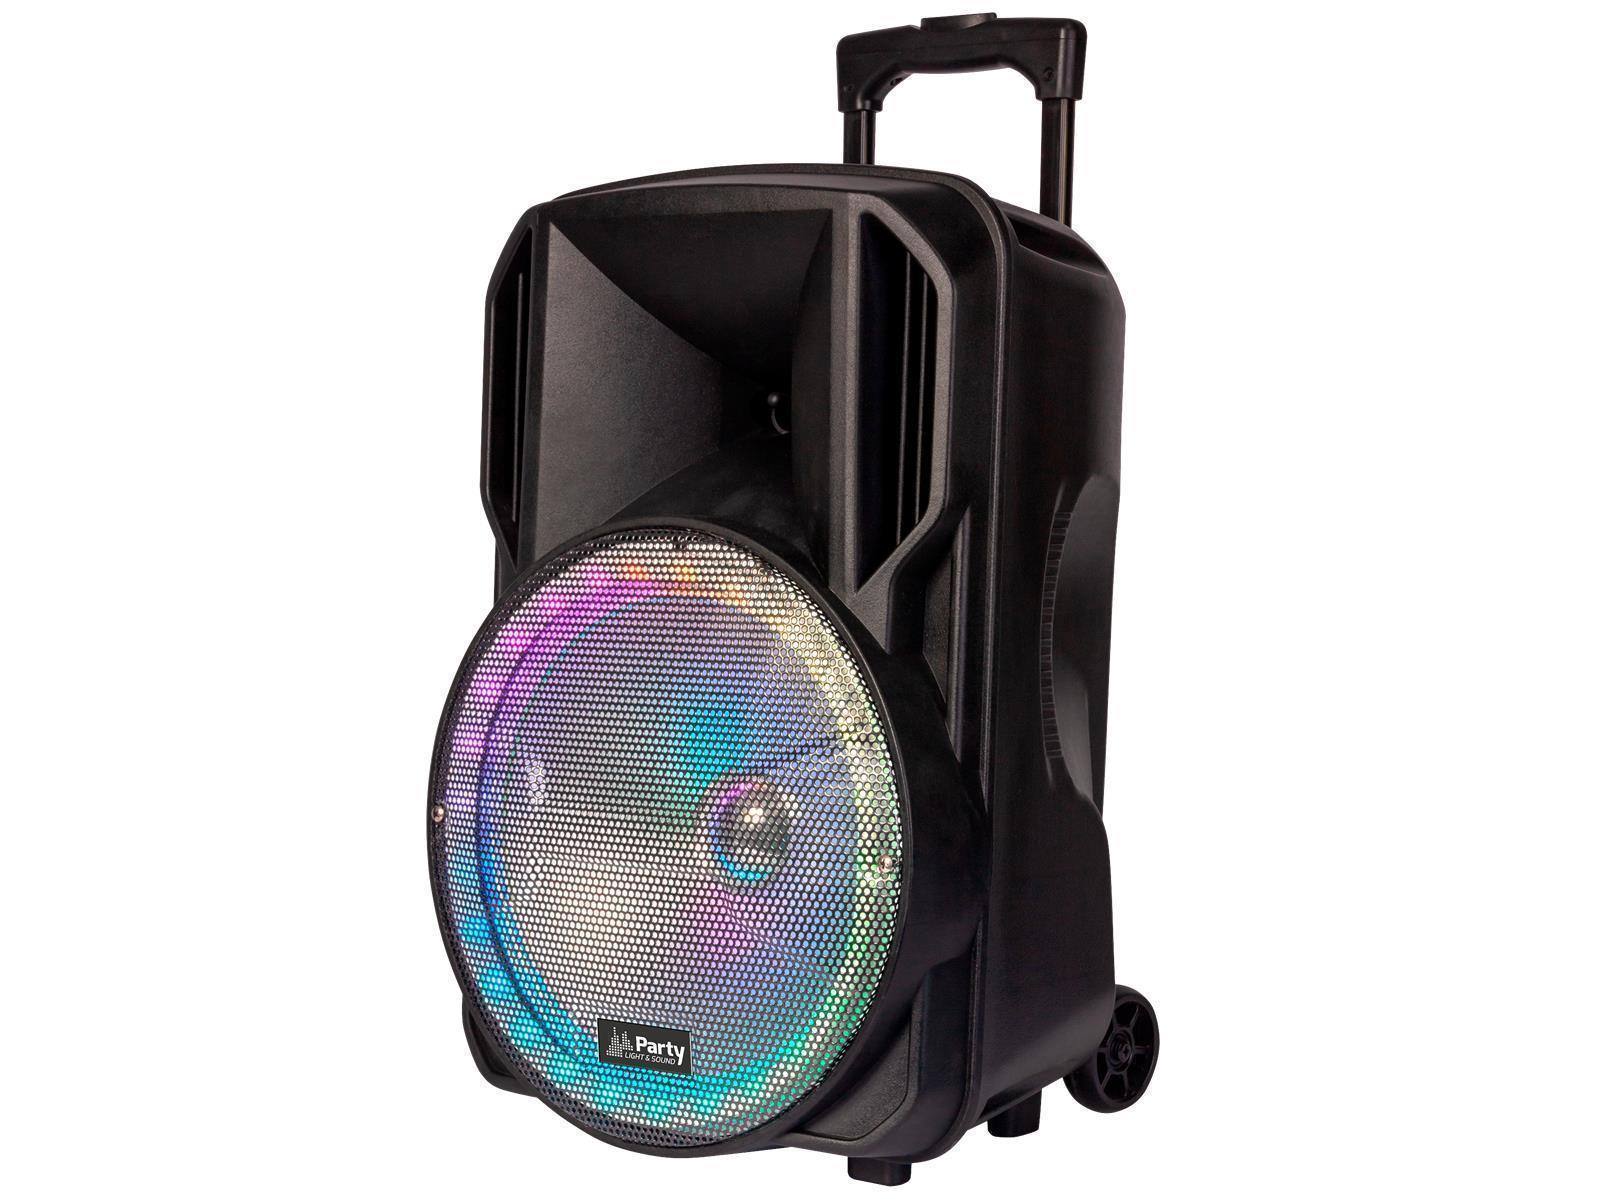 Mobile Beschallungsanlage PARTY ''PARTY-12RGB'' 700W, Bluetooth, LED-Beleuchtung